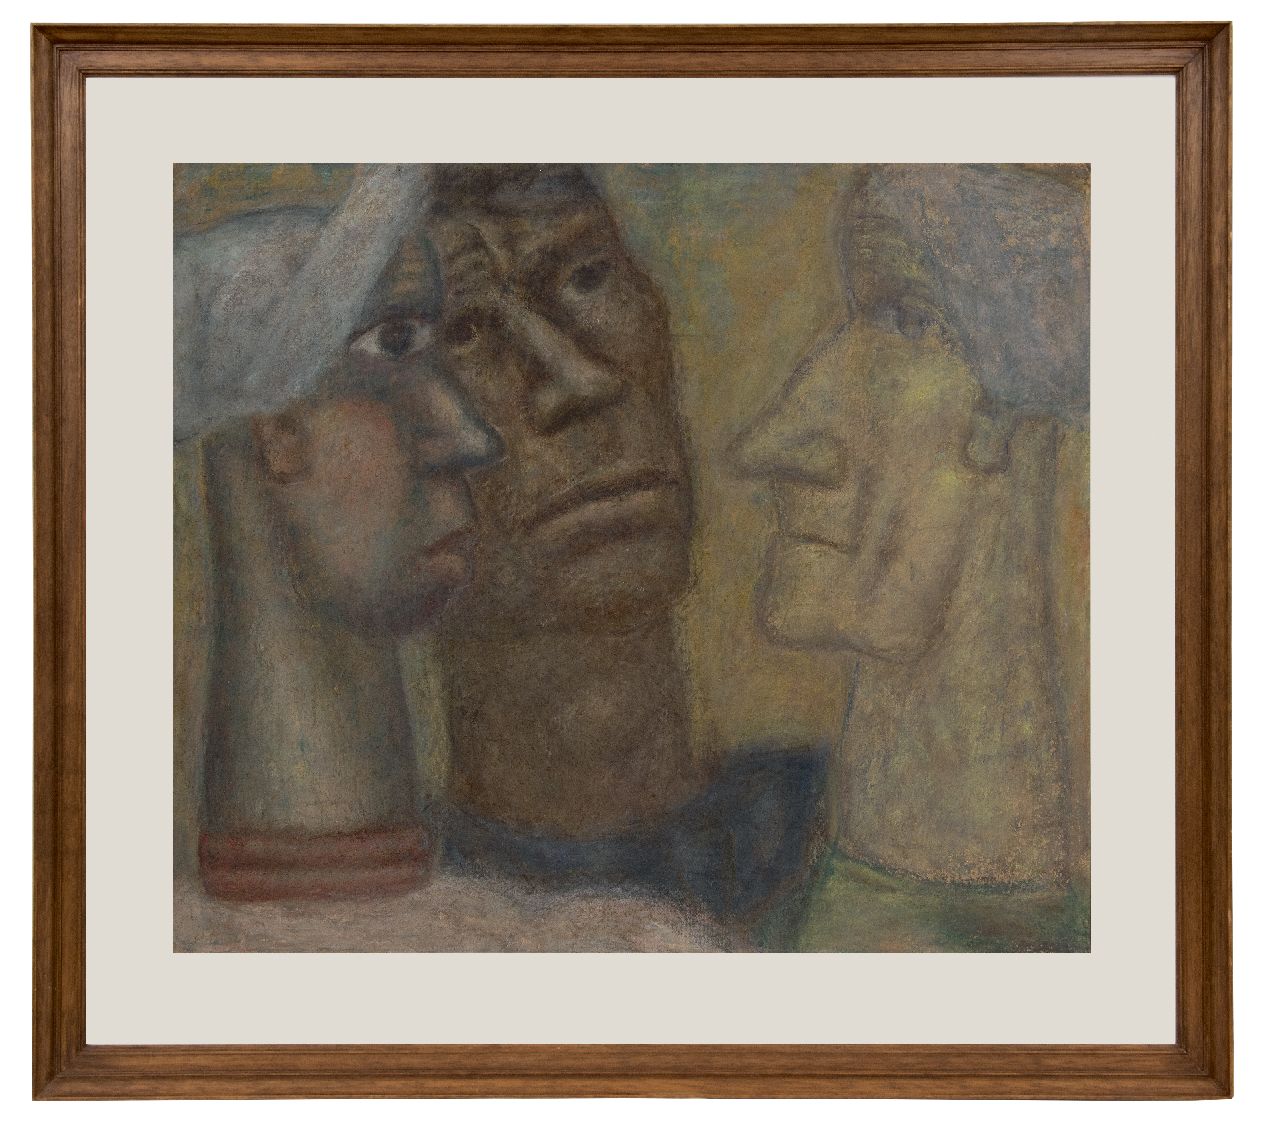 Gestel L.  | Leendert 'Leo' Gestel | Watercolours and drawings offered for sale | -, pastel on paper 66.0 x 77.0 cm, executed ca. 1932-1934